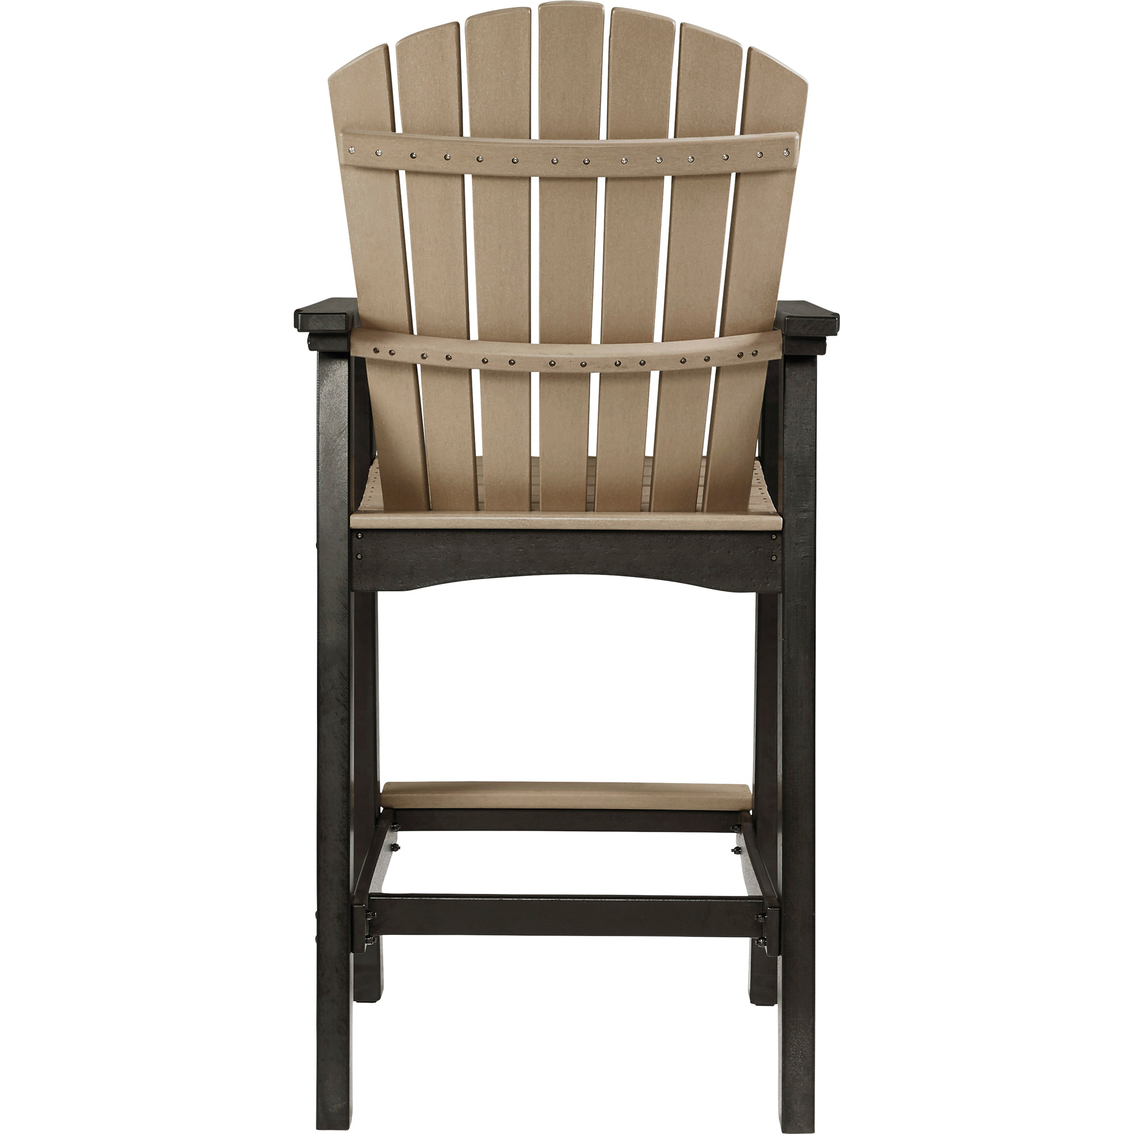 Signature Design by Ashley Fairen Trail Outdoor Barstool 2 pk. - Image 5 of 6